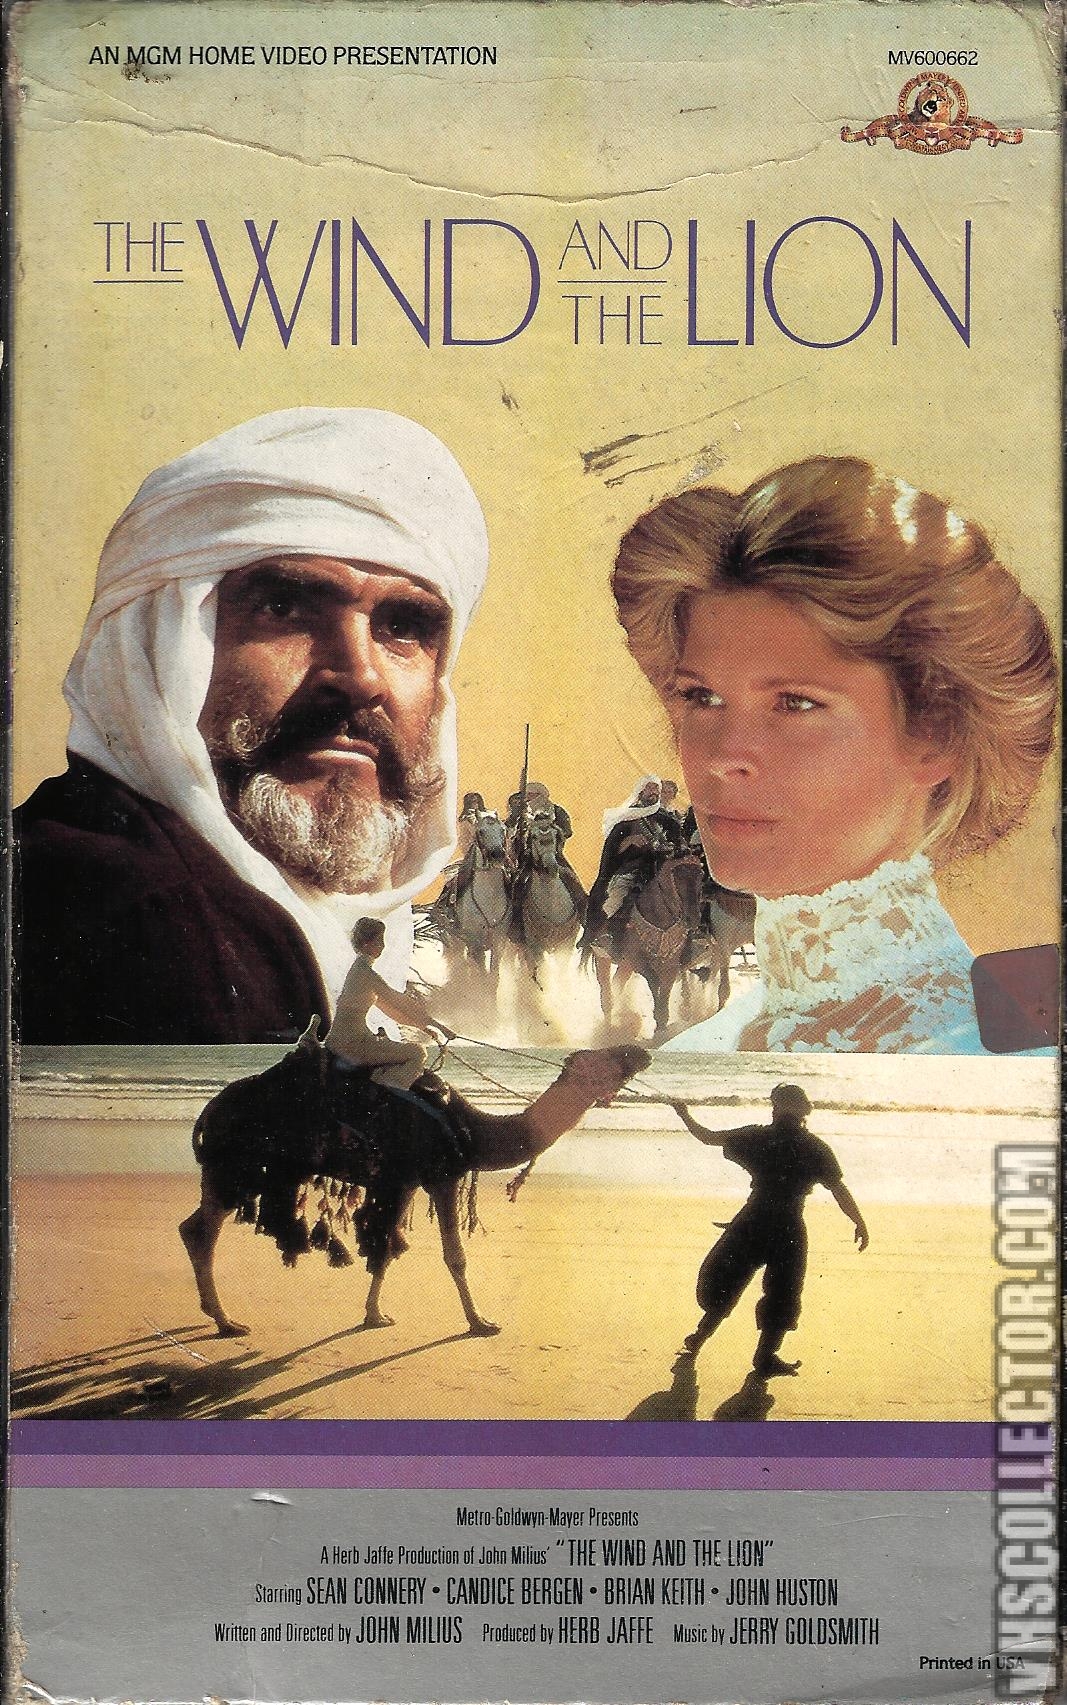 The Wind and the Lion | VHSCollector.com